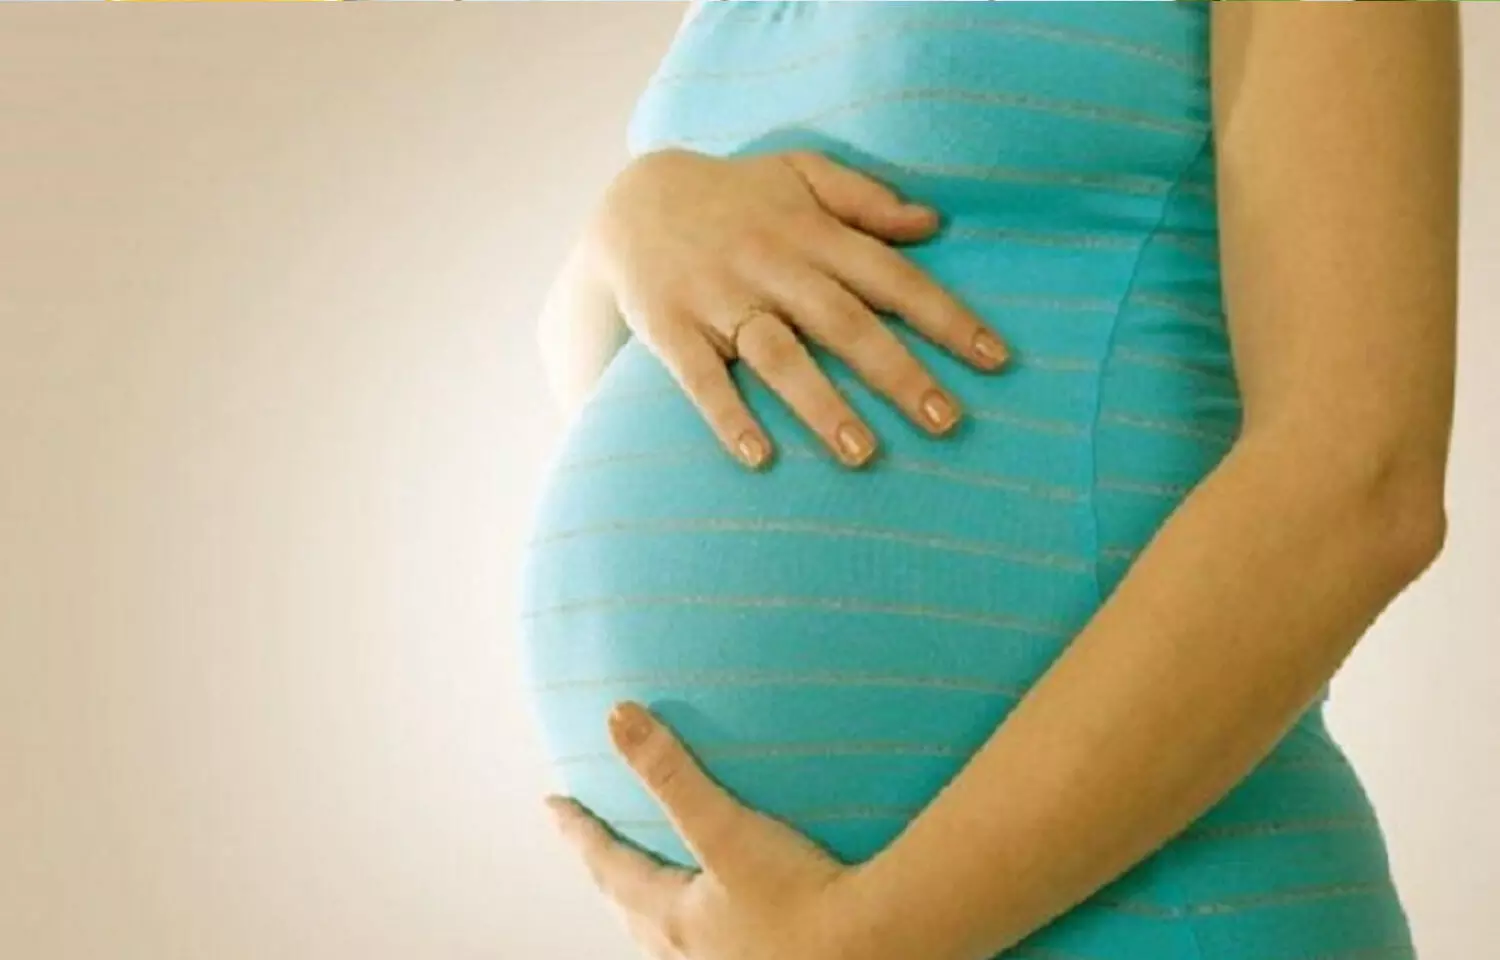 Elevated levels of Matrix Metalloproteinases tied to    genesis of severe Preeclampsia: Study